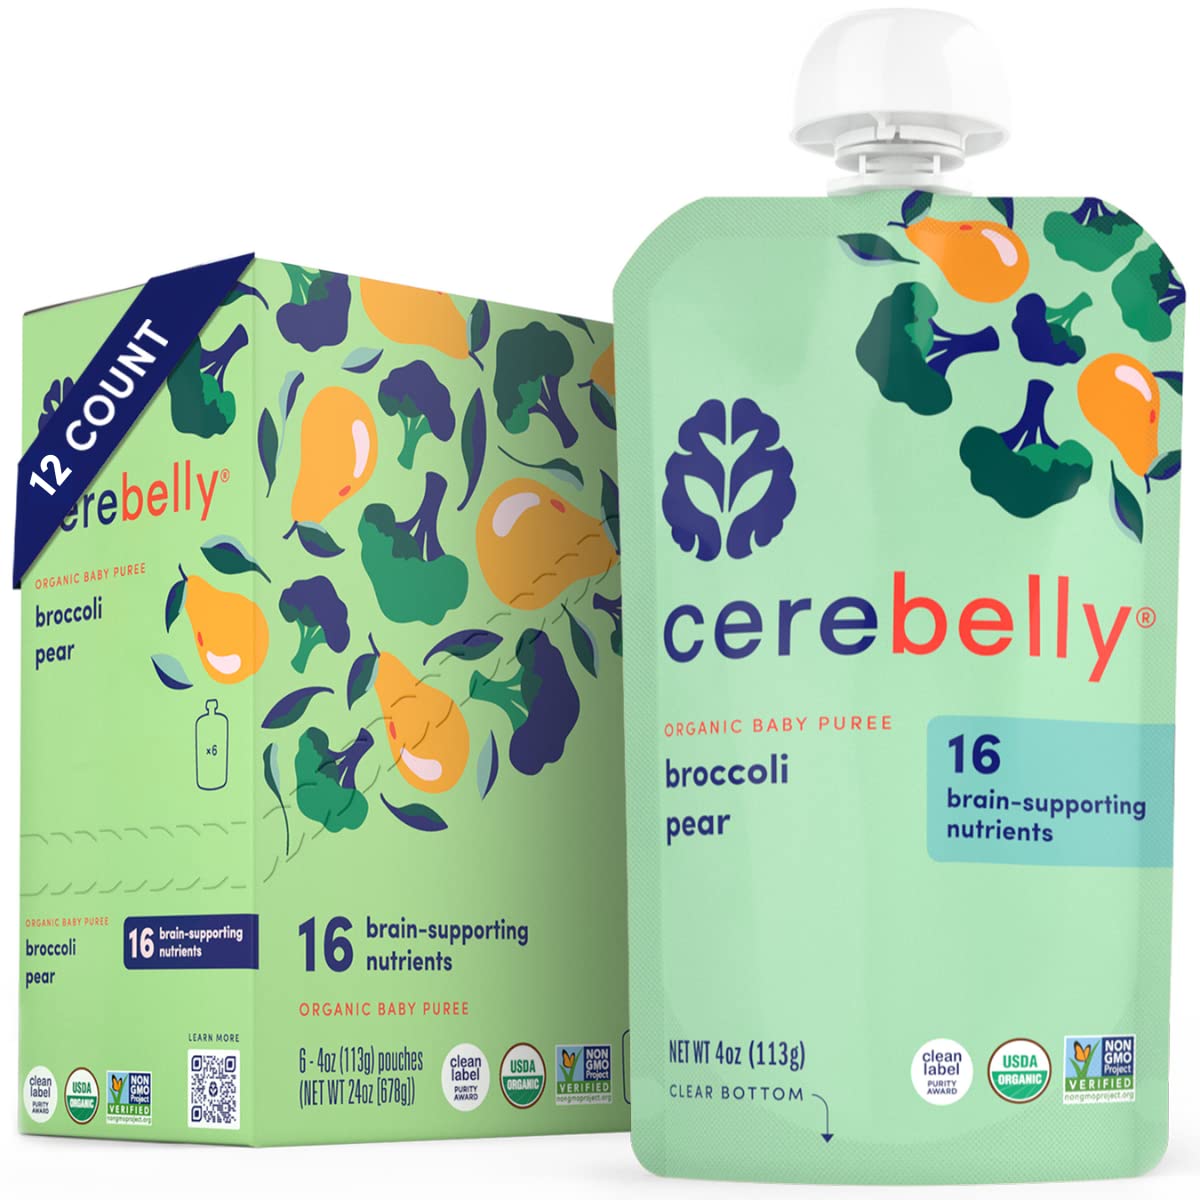 Cerebelly Baby Food Pouches – Organic Broccoli Pear (4 oz, Pack of 12) - Toddler Snacks - 16 Brain-Supporting Nutrients - Healthy Snacks, Made with Gluten-Free Ingredients, Non-GMO, No Added Sugar